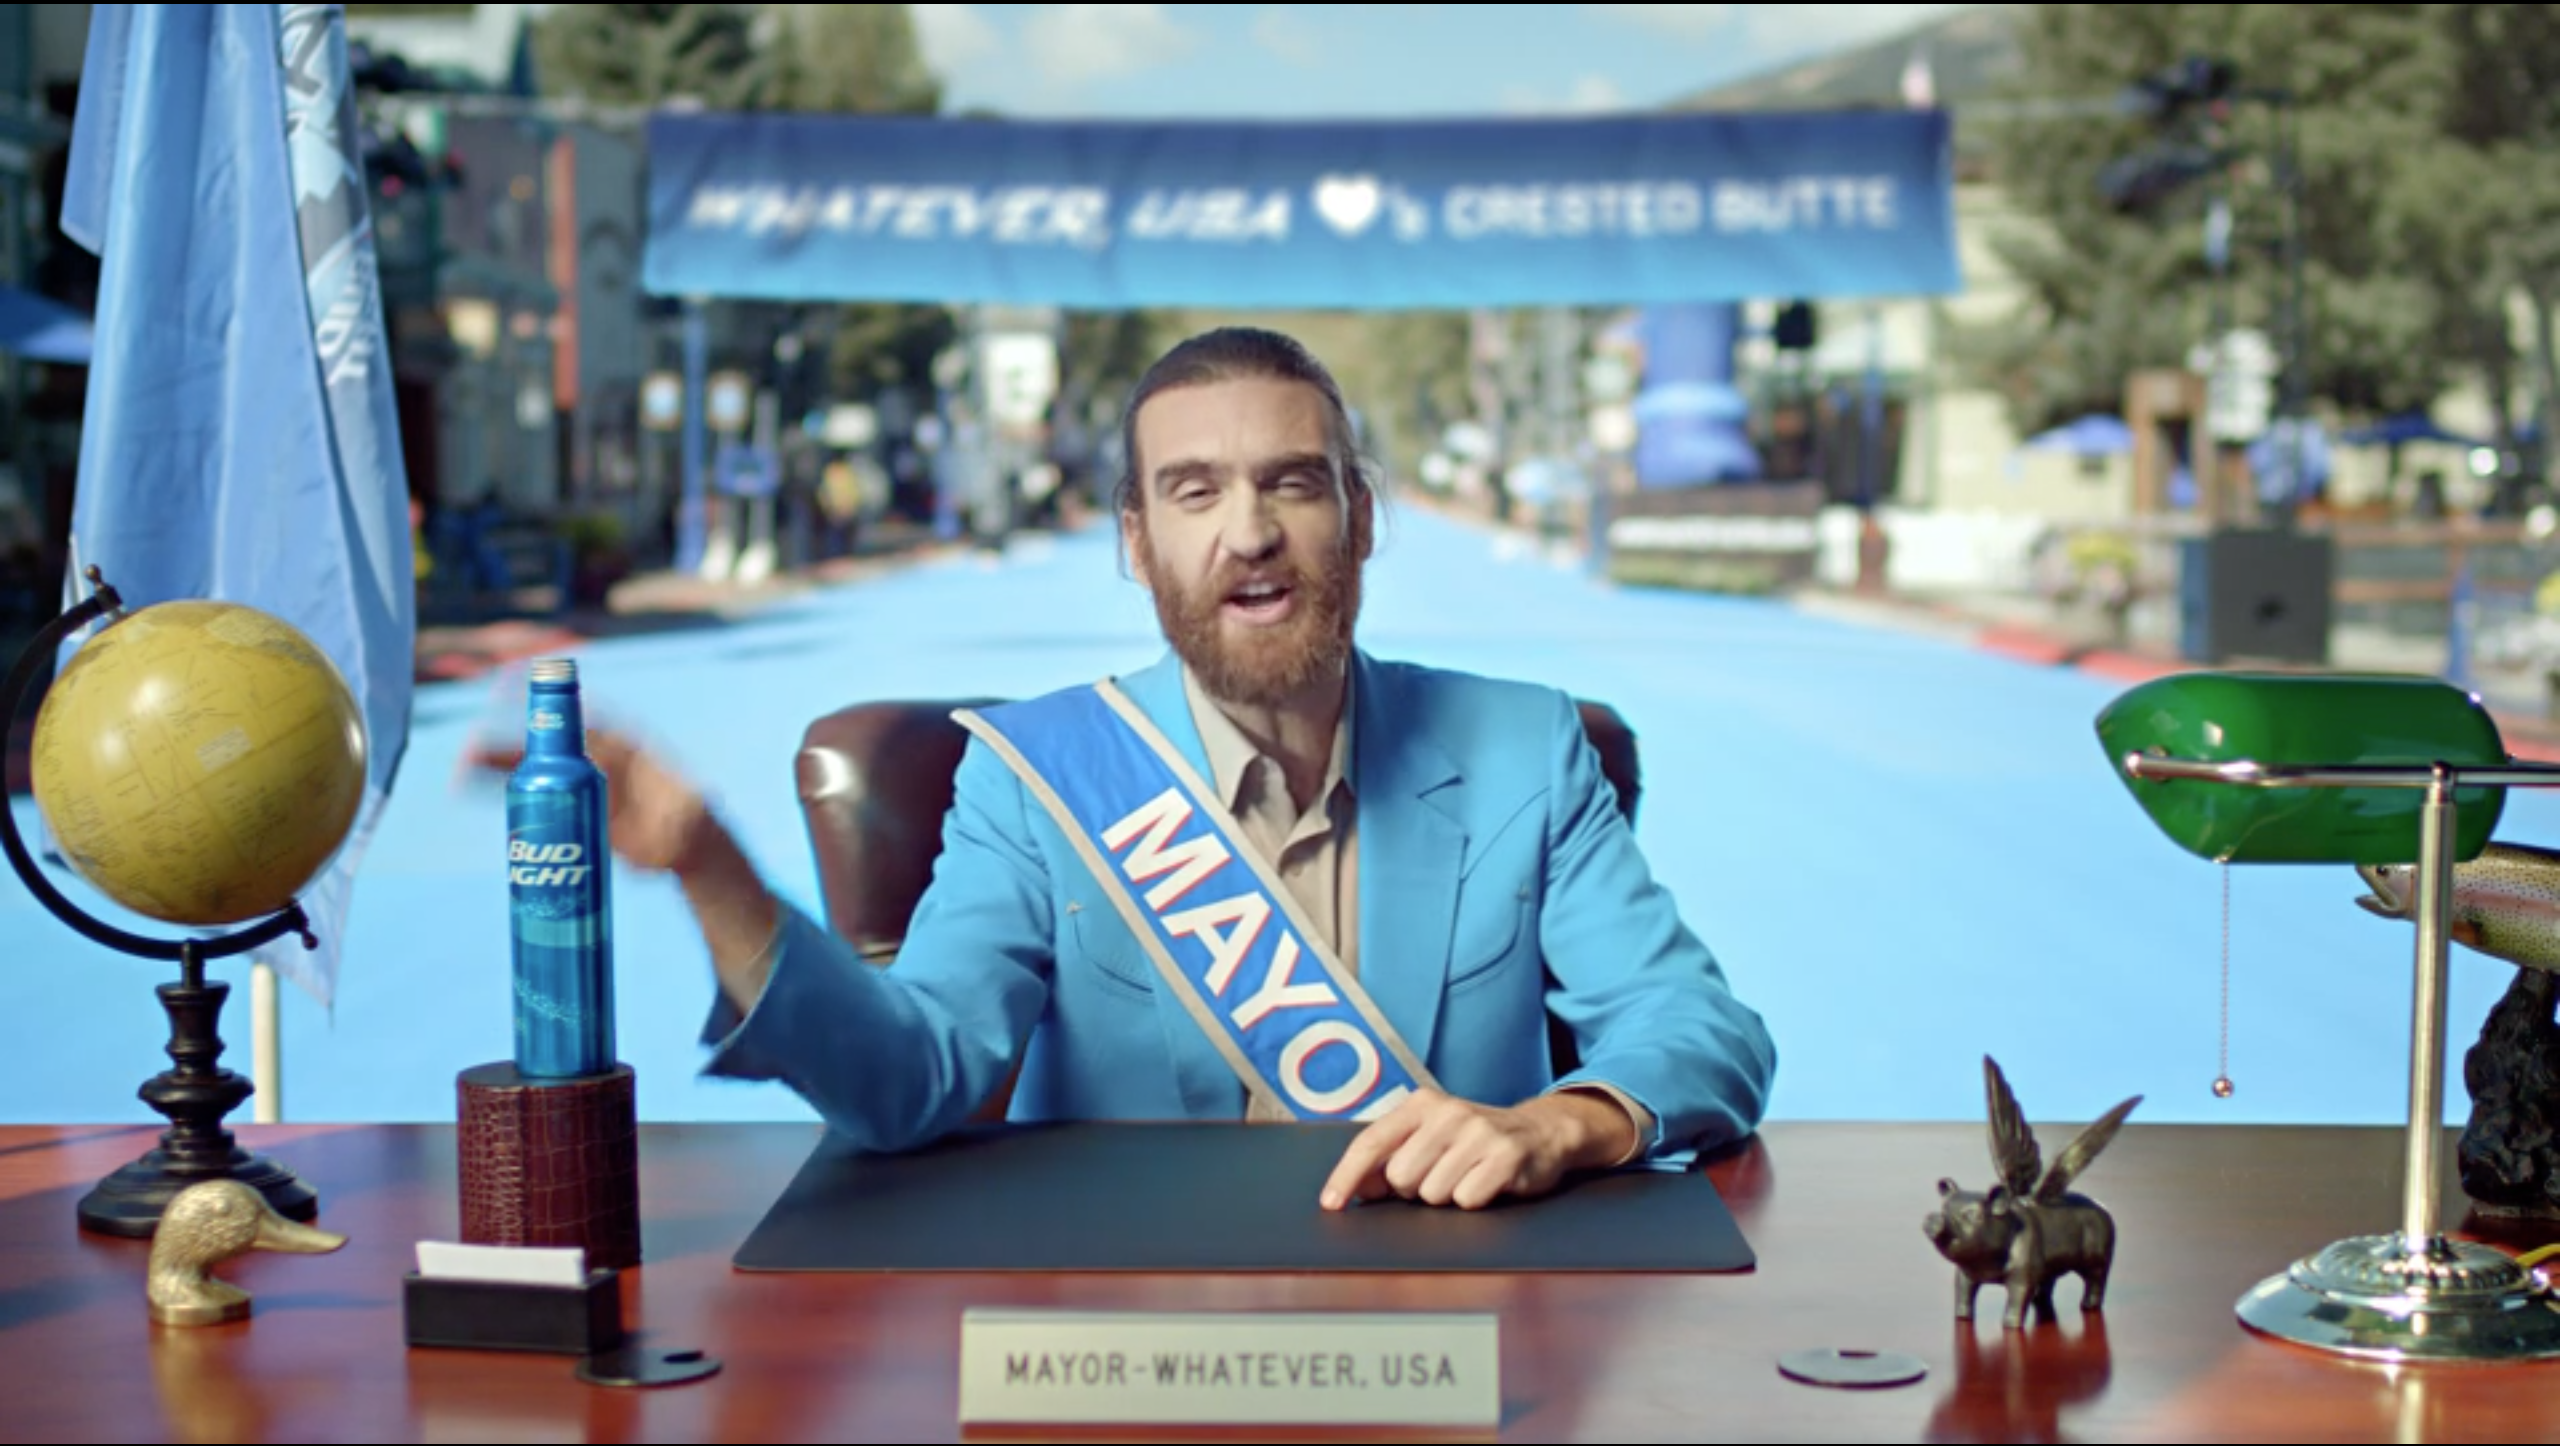 Bud Light | Whatever, USA :: Out of Breath